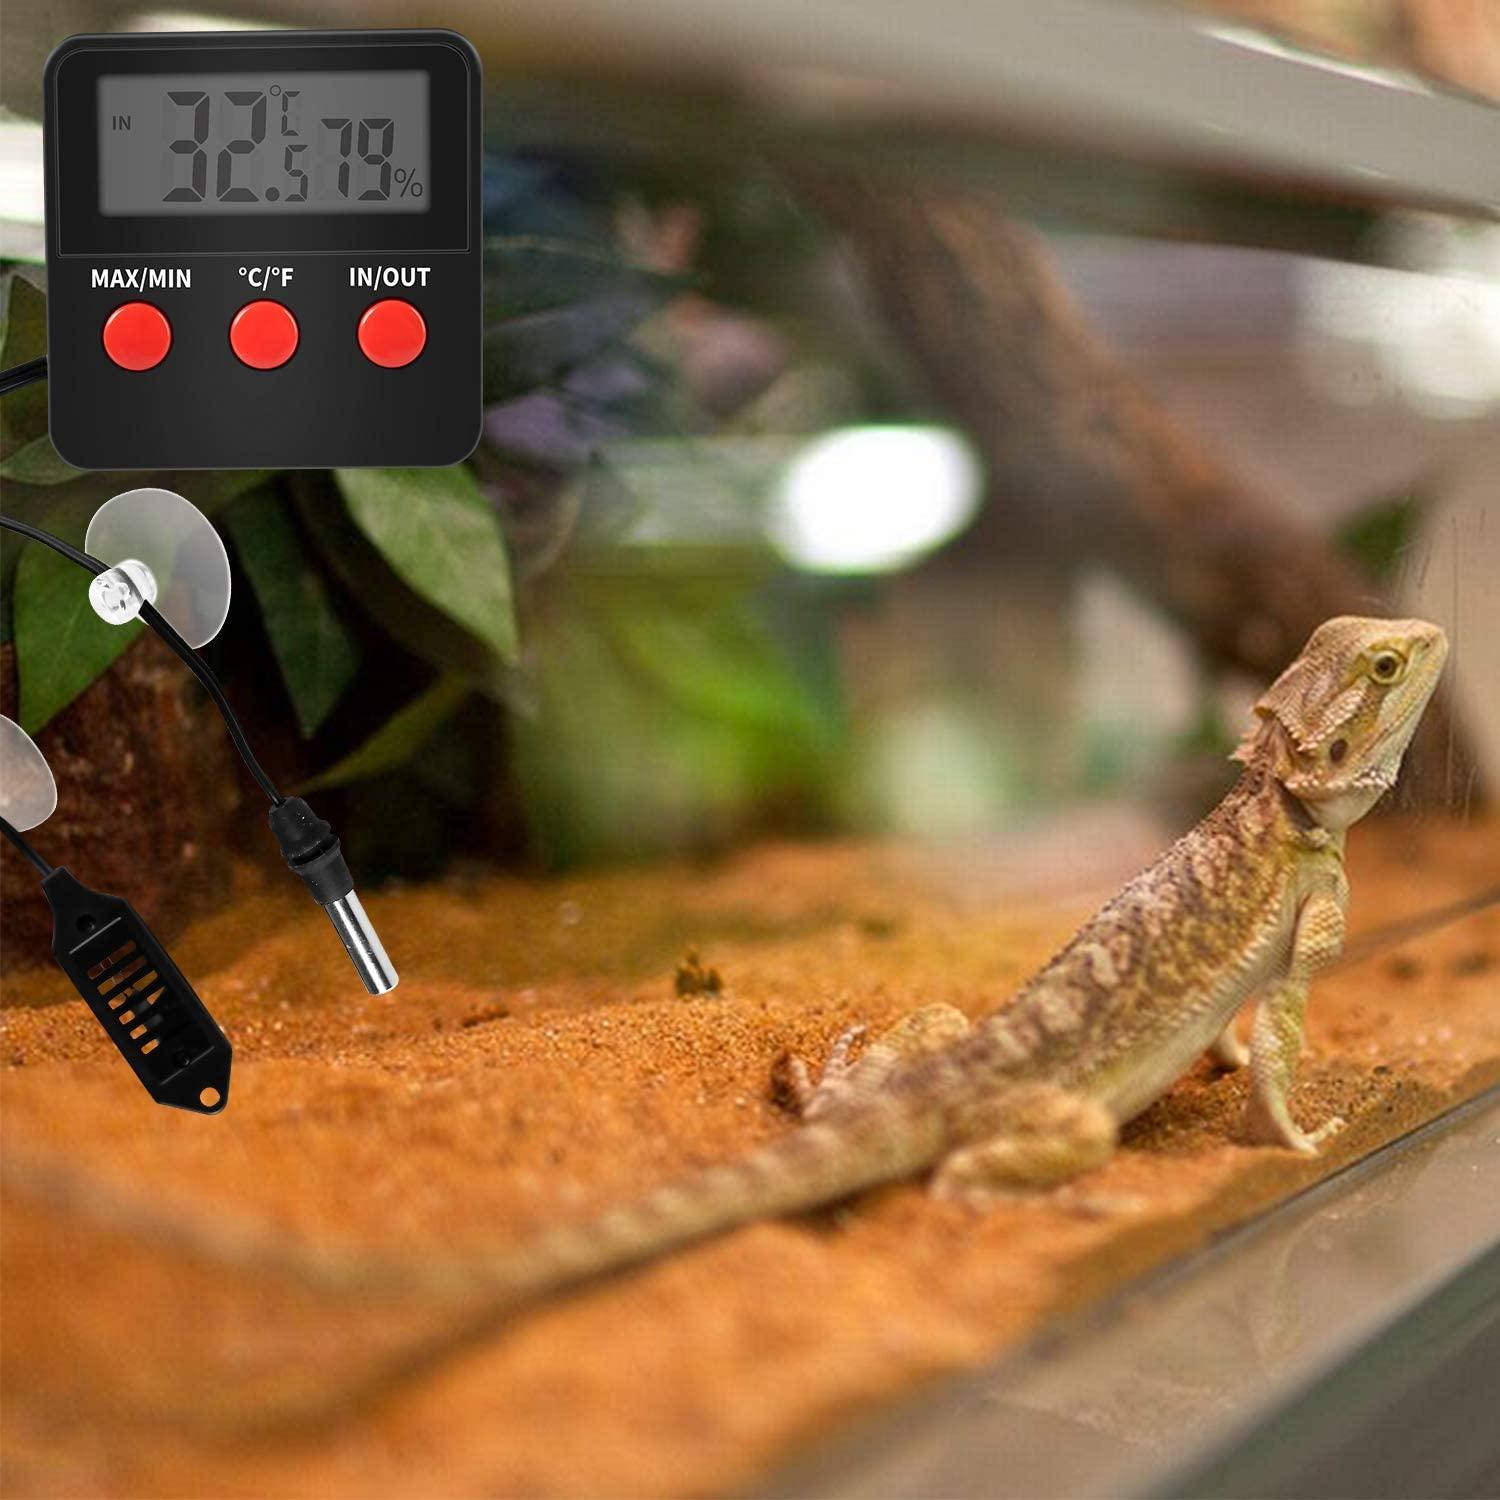 Digital Reptile Thermometer and Humidity Gauge Remote Probes